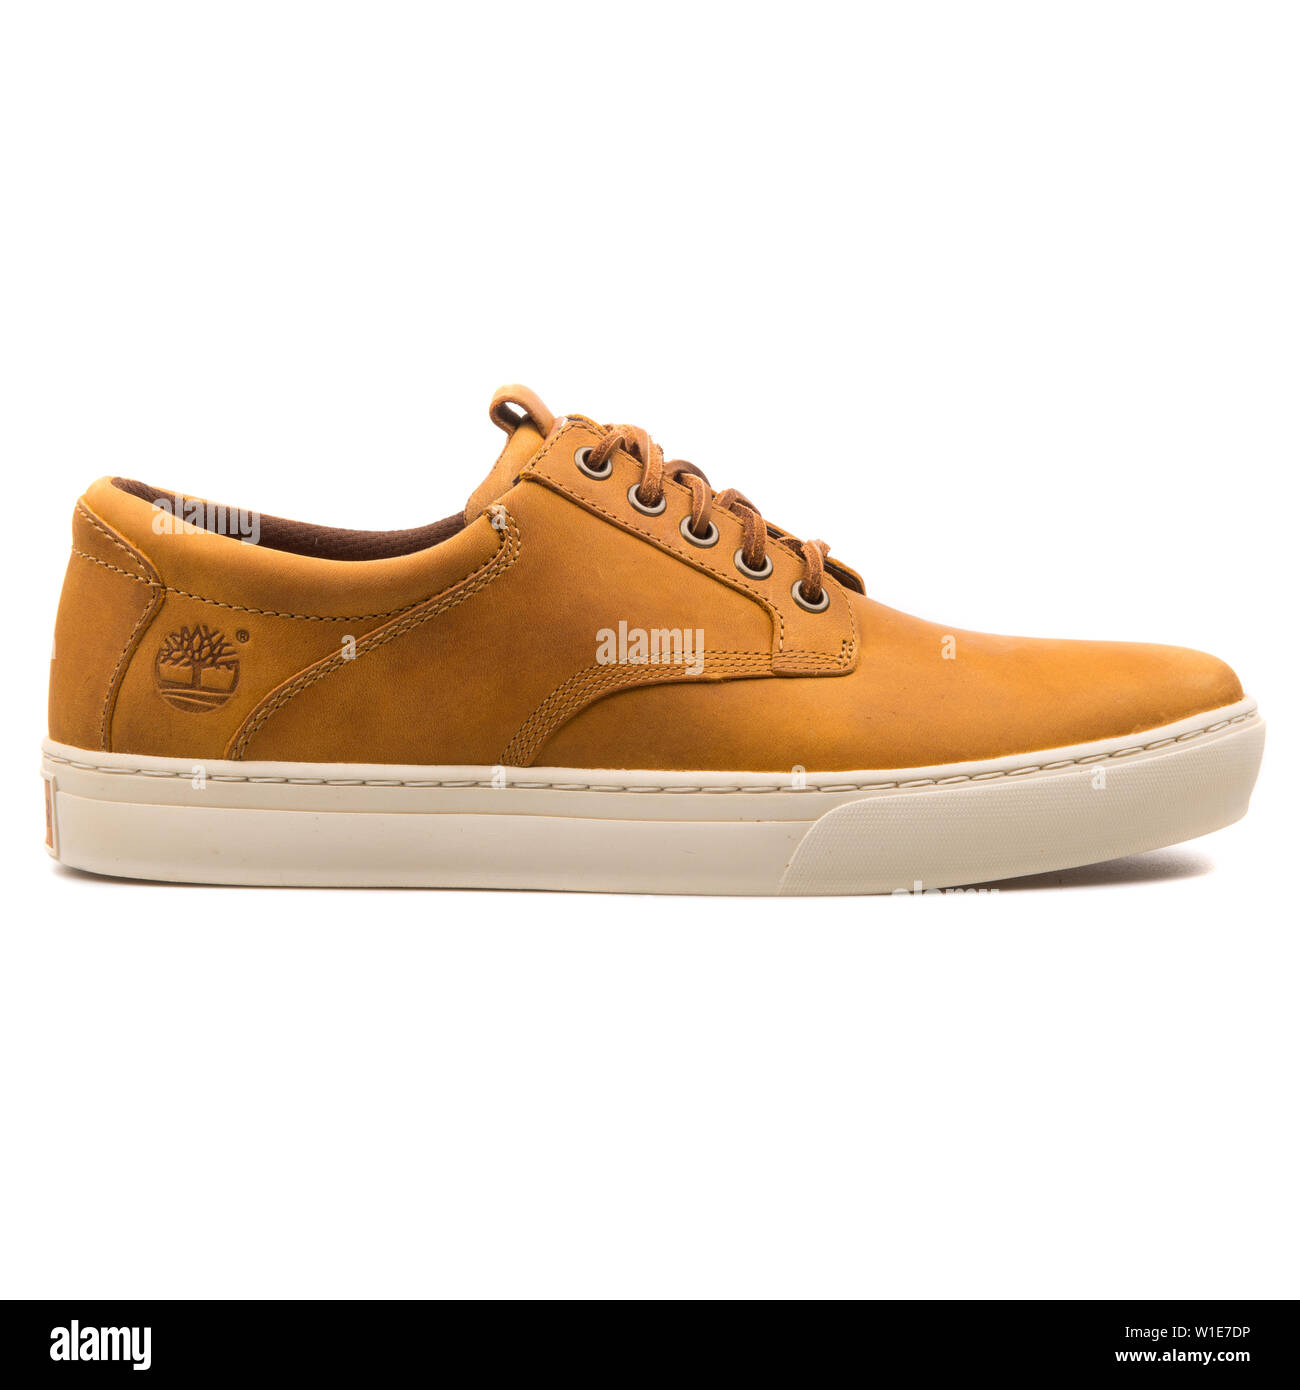 Timberland Leather Oxford Wheat shoe on 